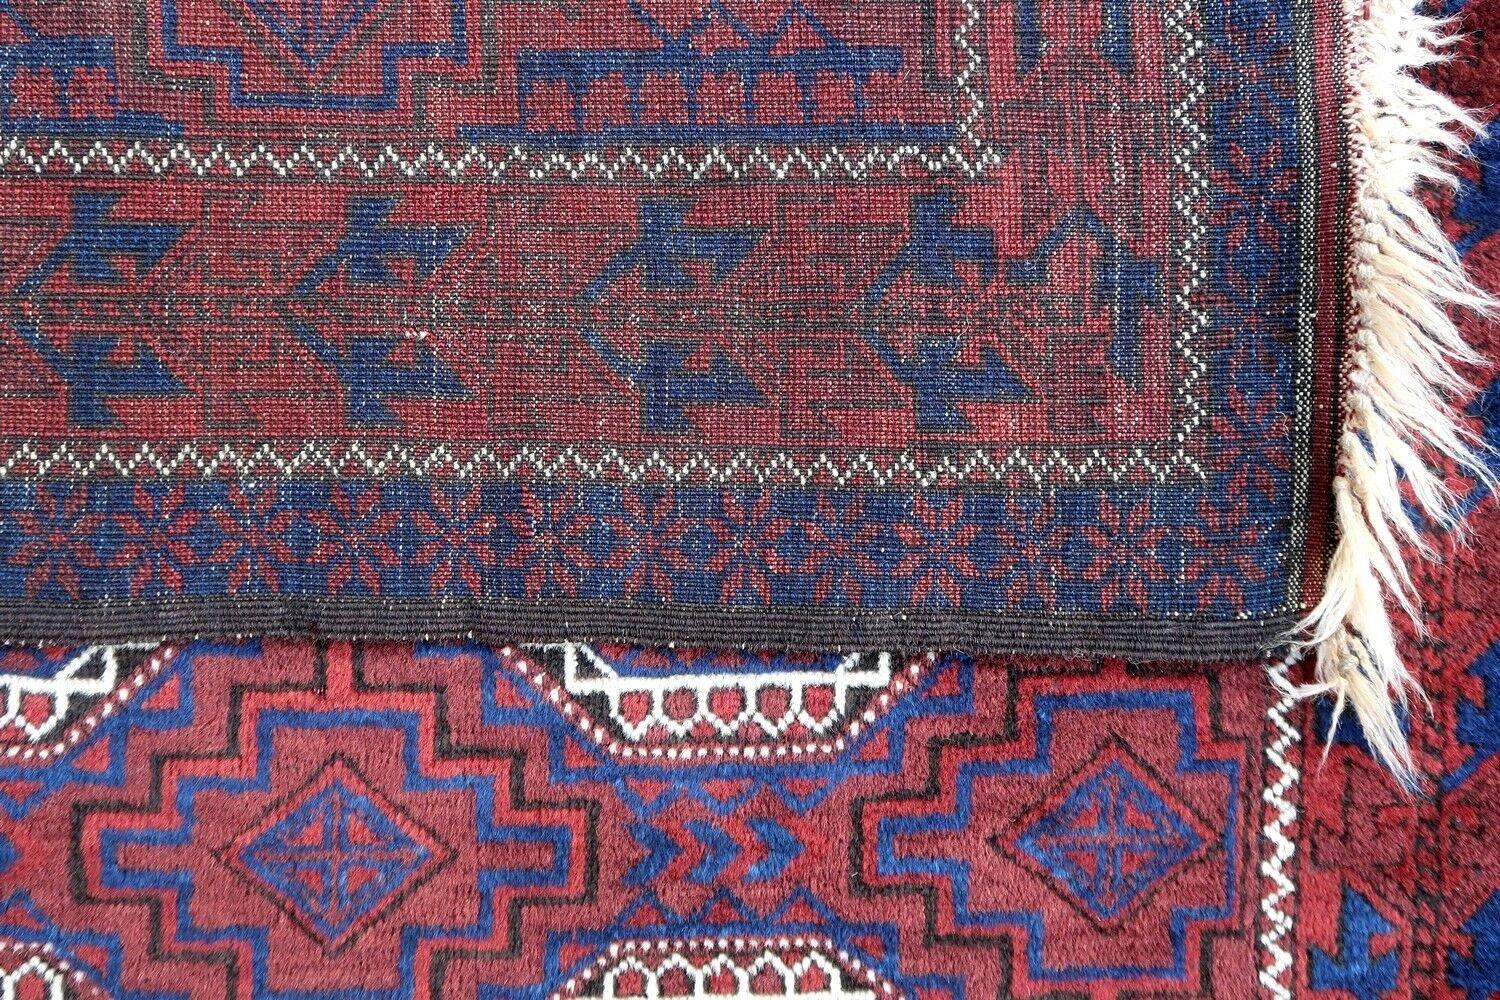 Handmade antique Baluch rug from Central Asia in original good condition. The rug is from the beginning of 20th century.

- Condition: original good,

- circa: 1900s,

- Size: 3.9' x 5.6' (120cm x 170cm),

- Material: wool,

- Country of